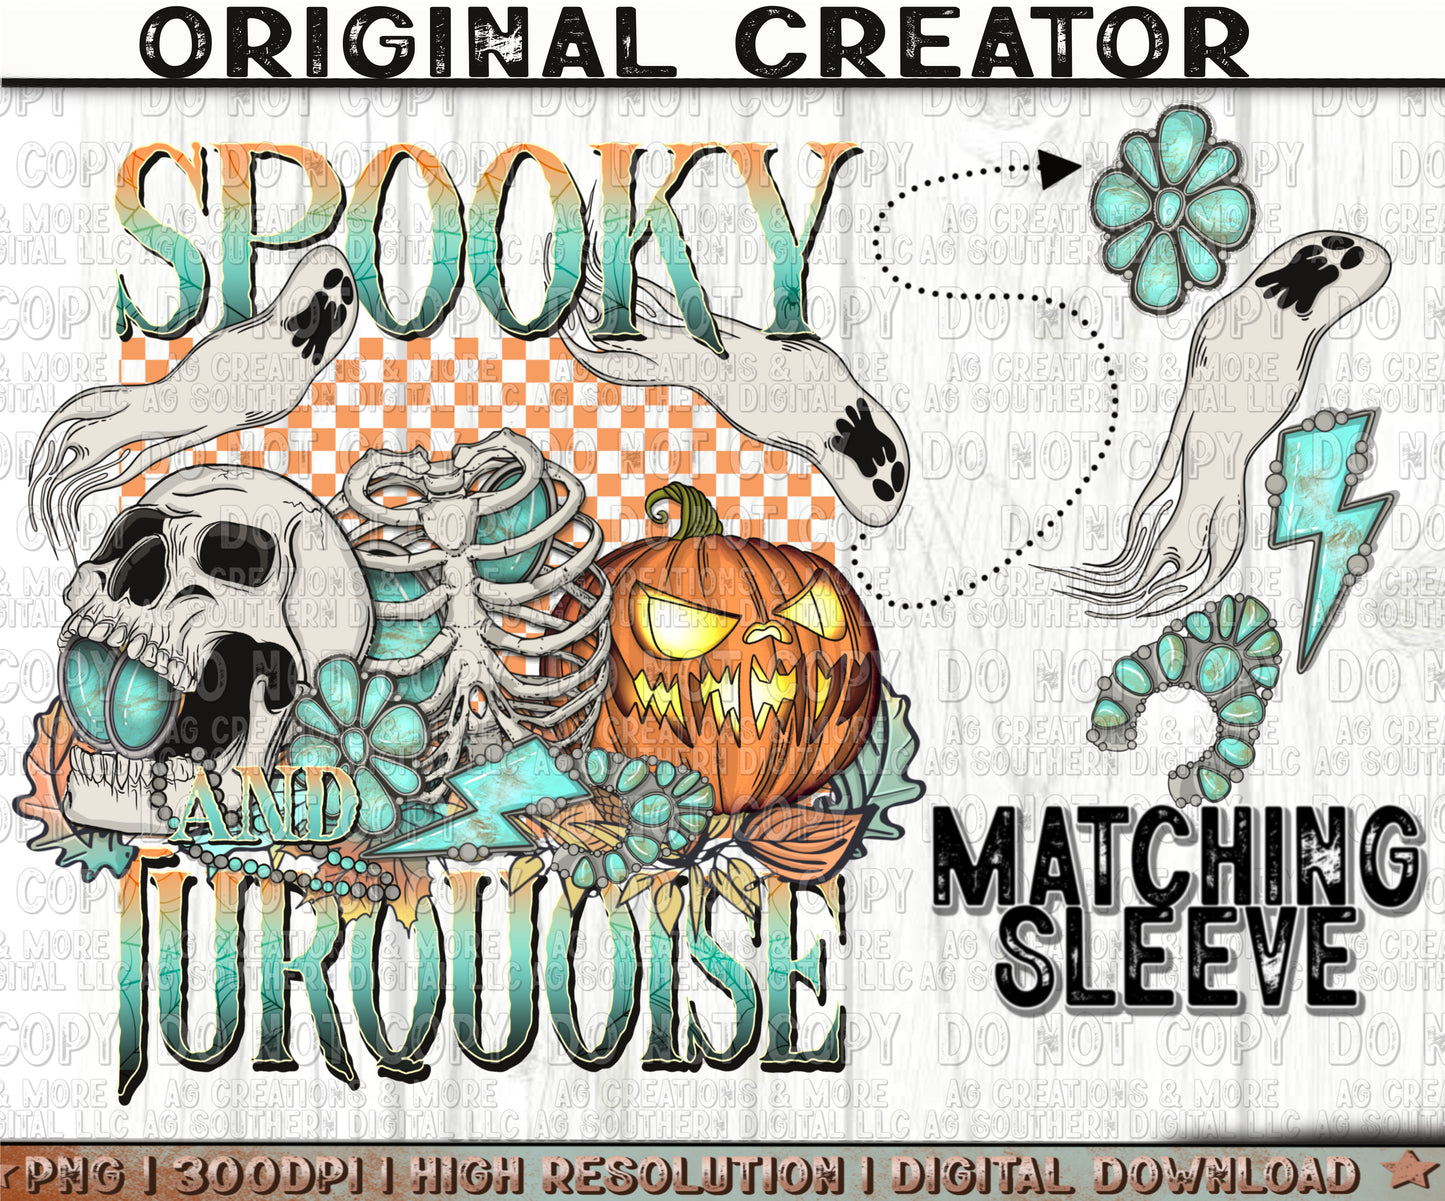 Spooky and Turquoise Sleeve set Digital Download PNG